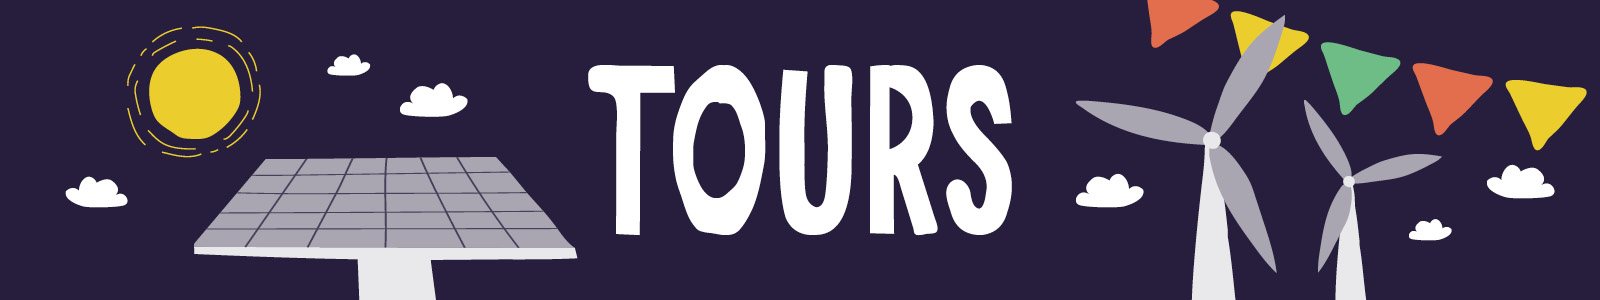 tours banner 